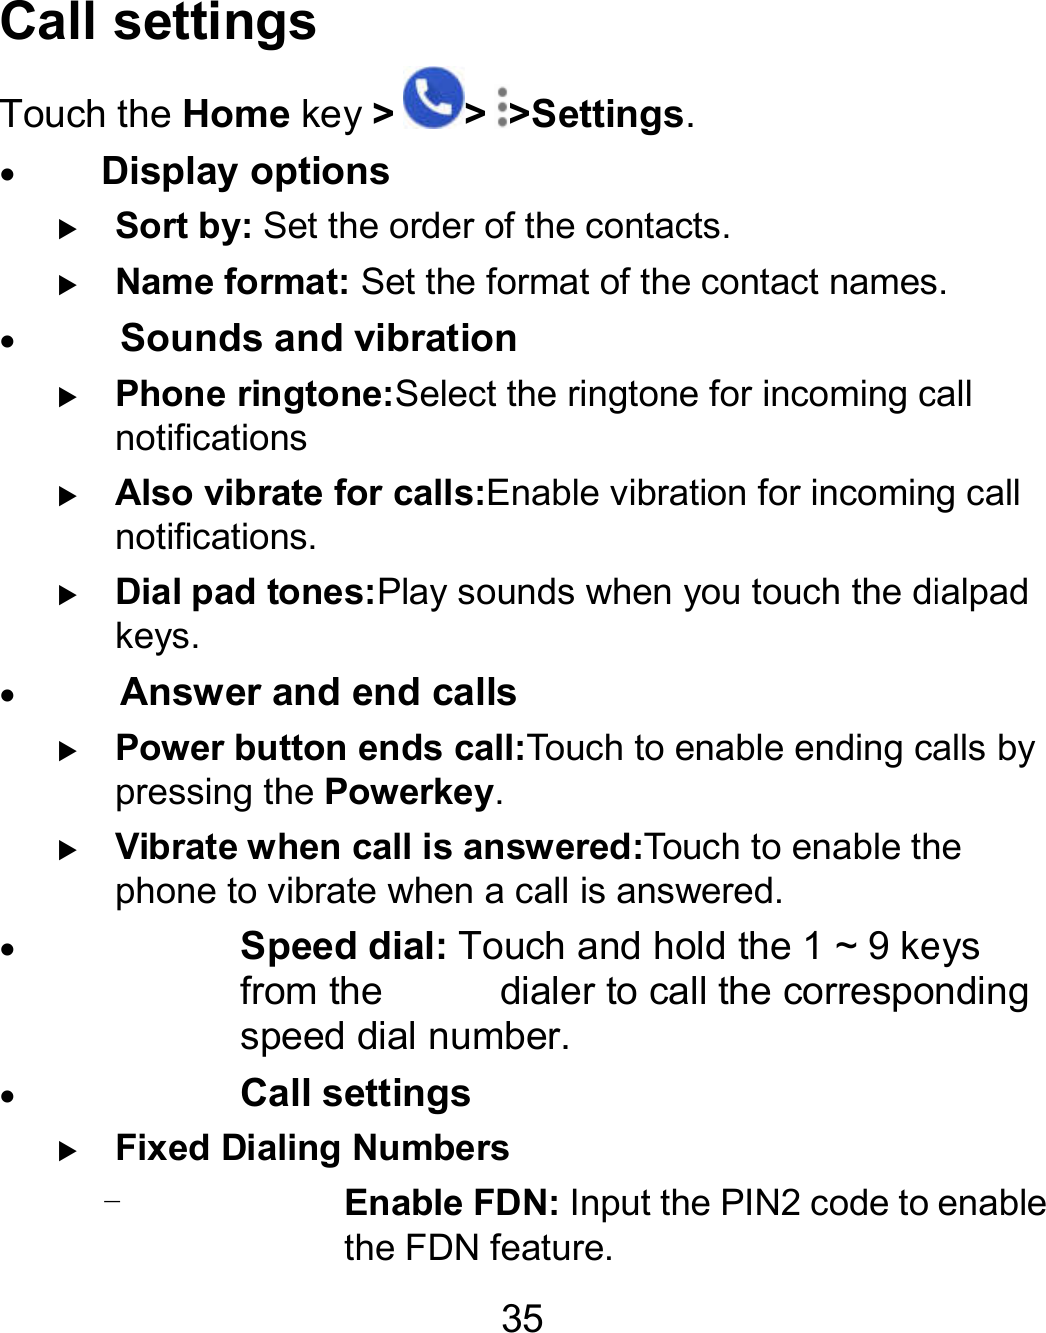 35 Call settings Touch the Home key &gt; &gt; &gt;Settings.  Display options  Sort by: Set the order of the contacts.  Name format: Set the format of the contact names   Sounds and vibration  Phone ringtone:Select the ringtone for incoming call notifications  Also vibrate for calls:Enable vibration for incoming call notifications.  Dial pad tones:Play sounds when you touch the dialpad keys.    Answer and end calls  Power button ends call:Touch to enable ending calls by pressing the Powerkey.  Vibrate when call is answered:Touch to enable the phone to vibrate when a call is answered.  Speed dial: Touch and hold the 1 ~ 9 keys from the            dialer to call the corresponding speed dial number.  Call settings  Fixed Dialing Numbers - Enable FDN: Input the PIN2 code to enable the FDN feature. contact names. elect the ringtone for incoming call nable vibration for incoming call the dialpad to enable ending calls by to enable the Touch and hold the 1 ~ 9 keys corresponding Input the PIN2 code to enable 